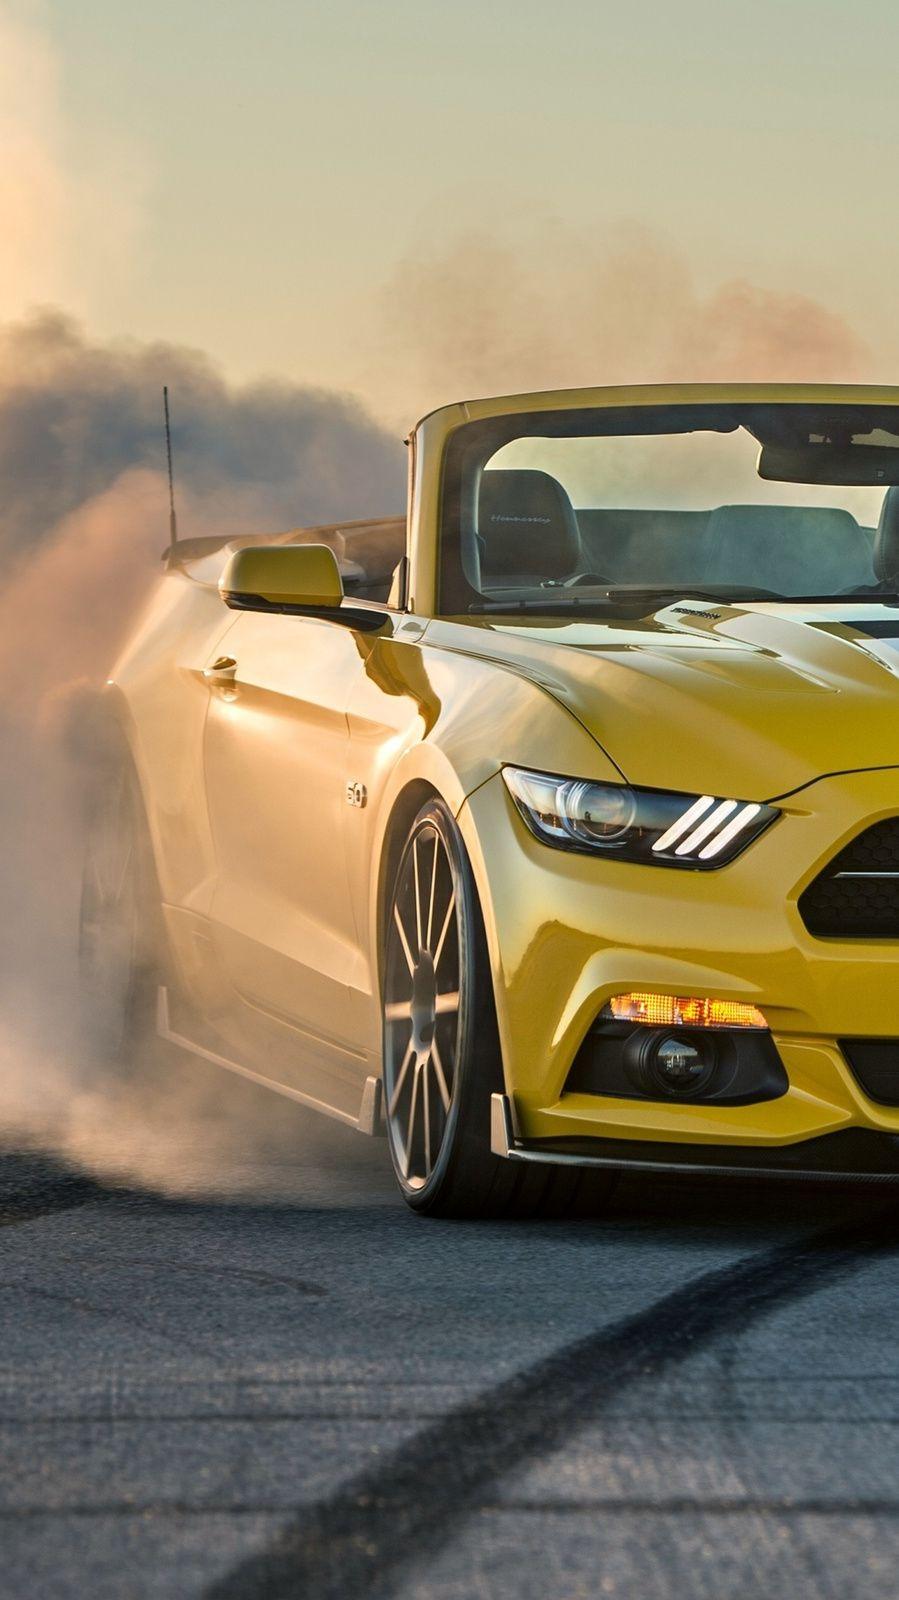 Ford Mustang Gt Convertible Burnout IPhone Wallpaper. IPhone